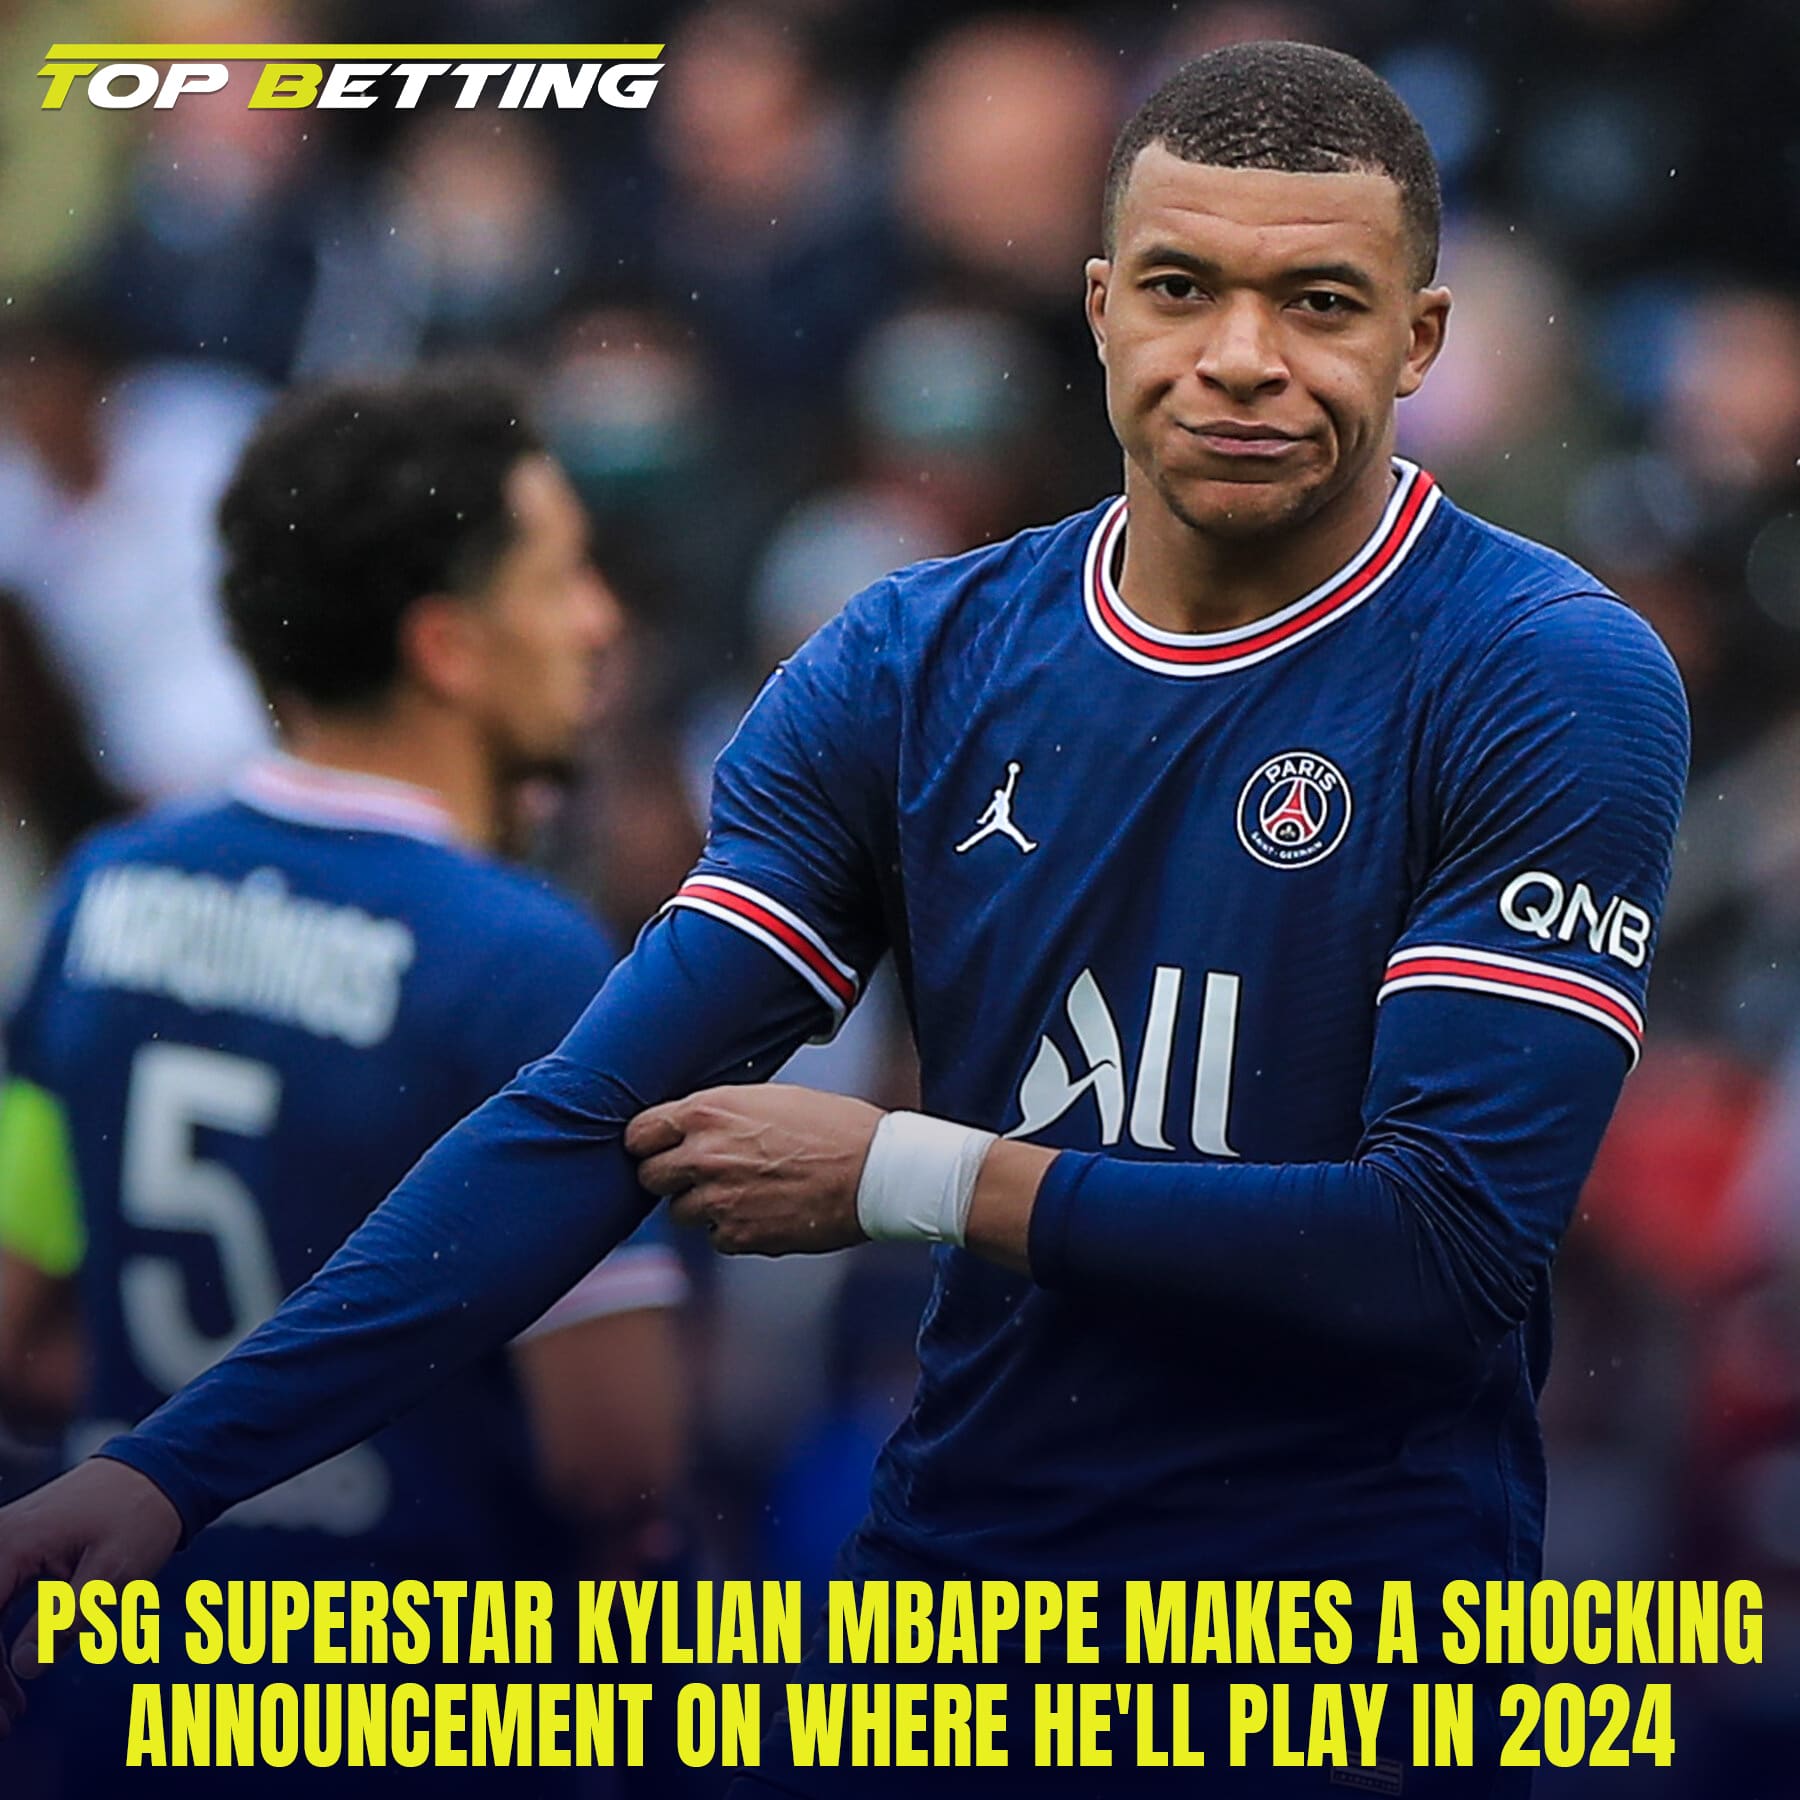 PSG superstar Kylian Mbappe makes a shocking announcement on where he’ll play in 2024